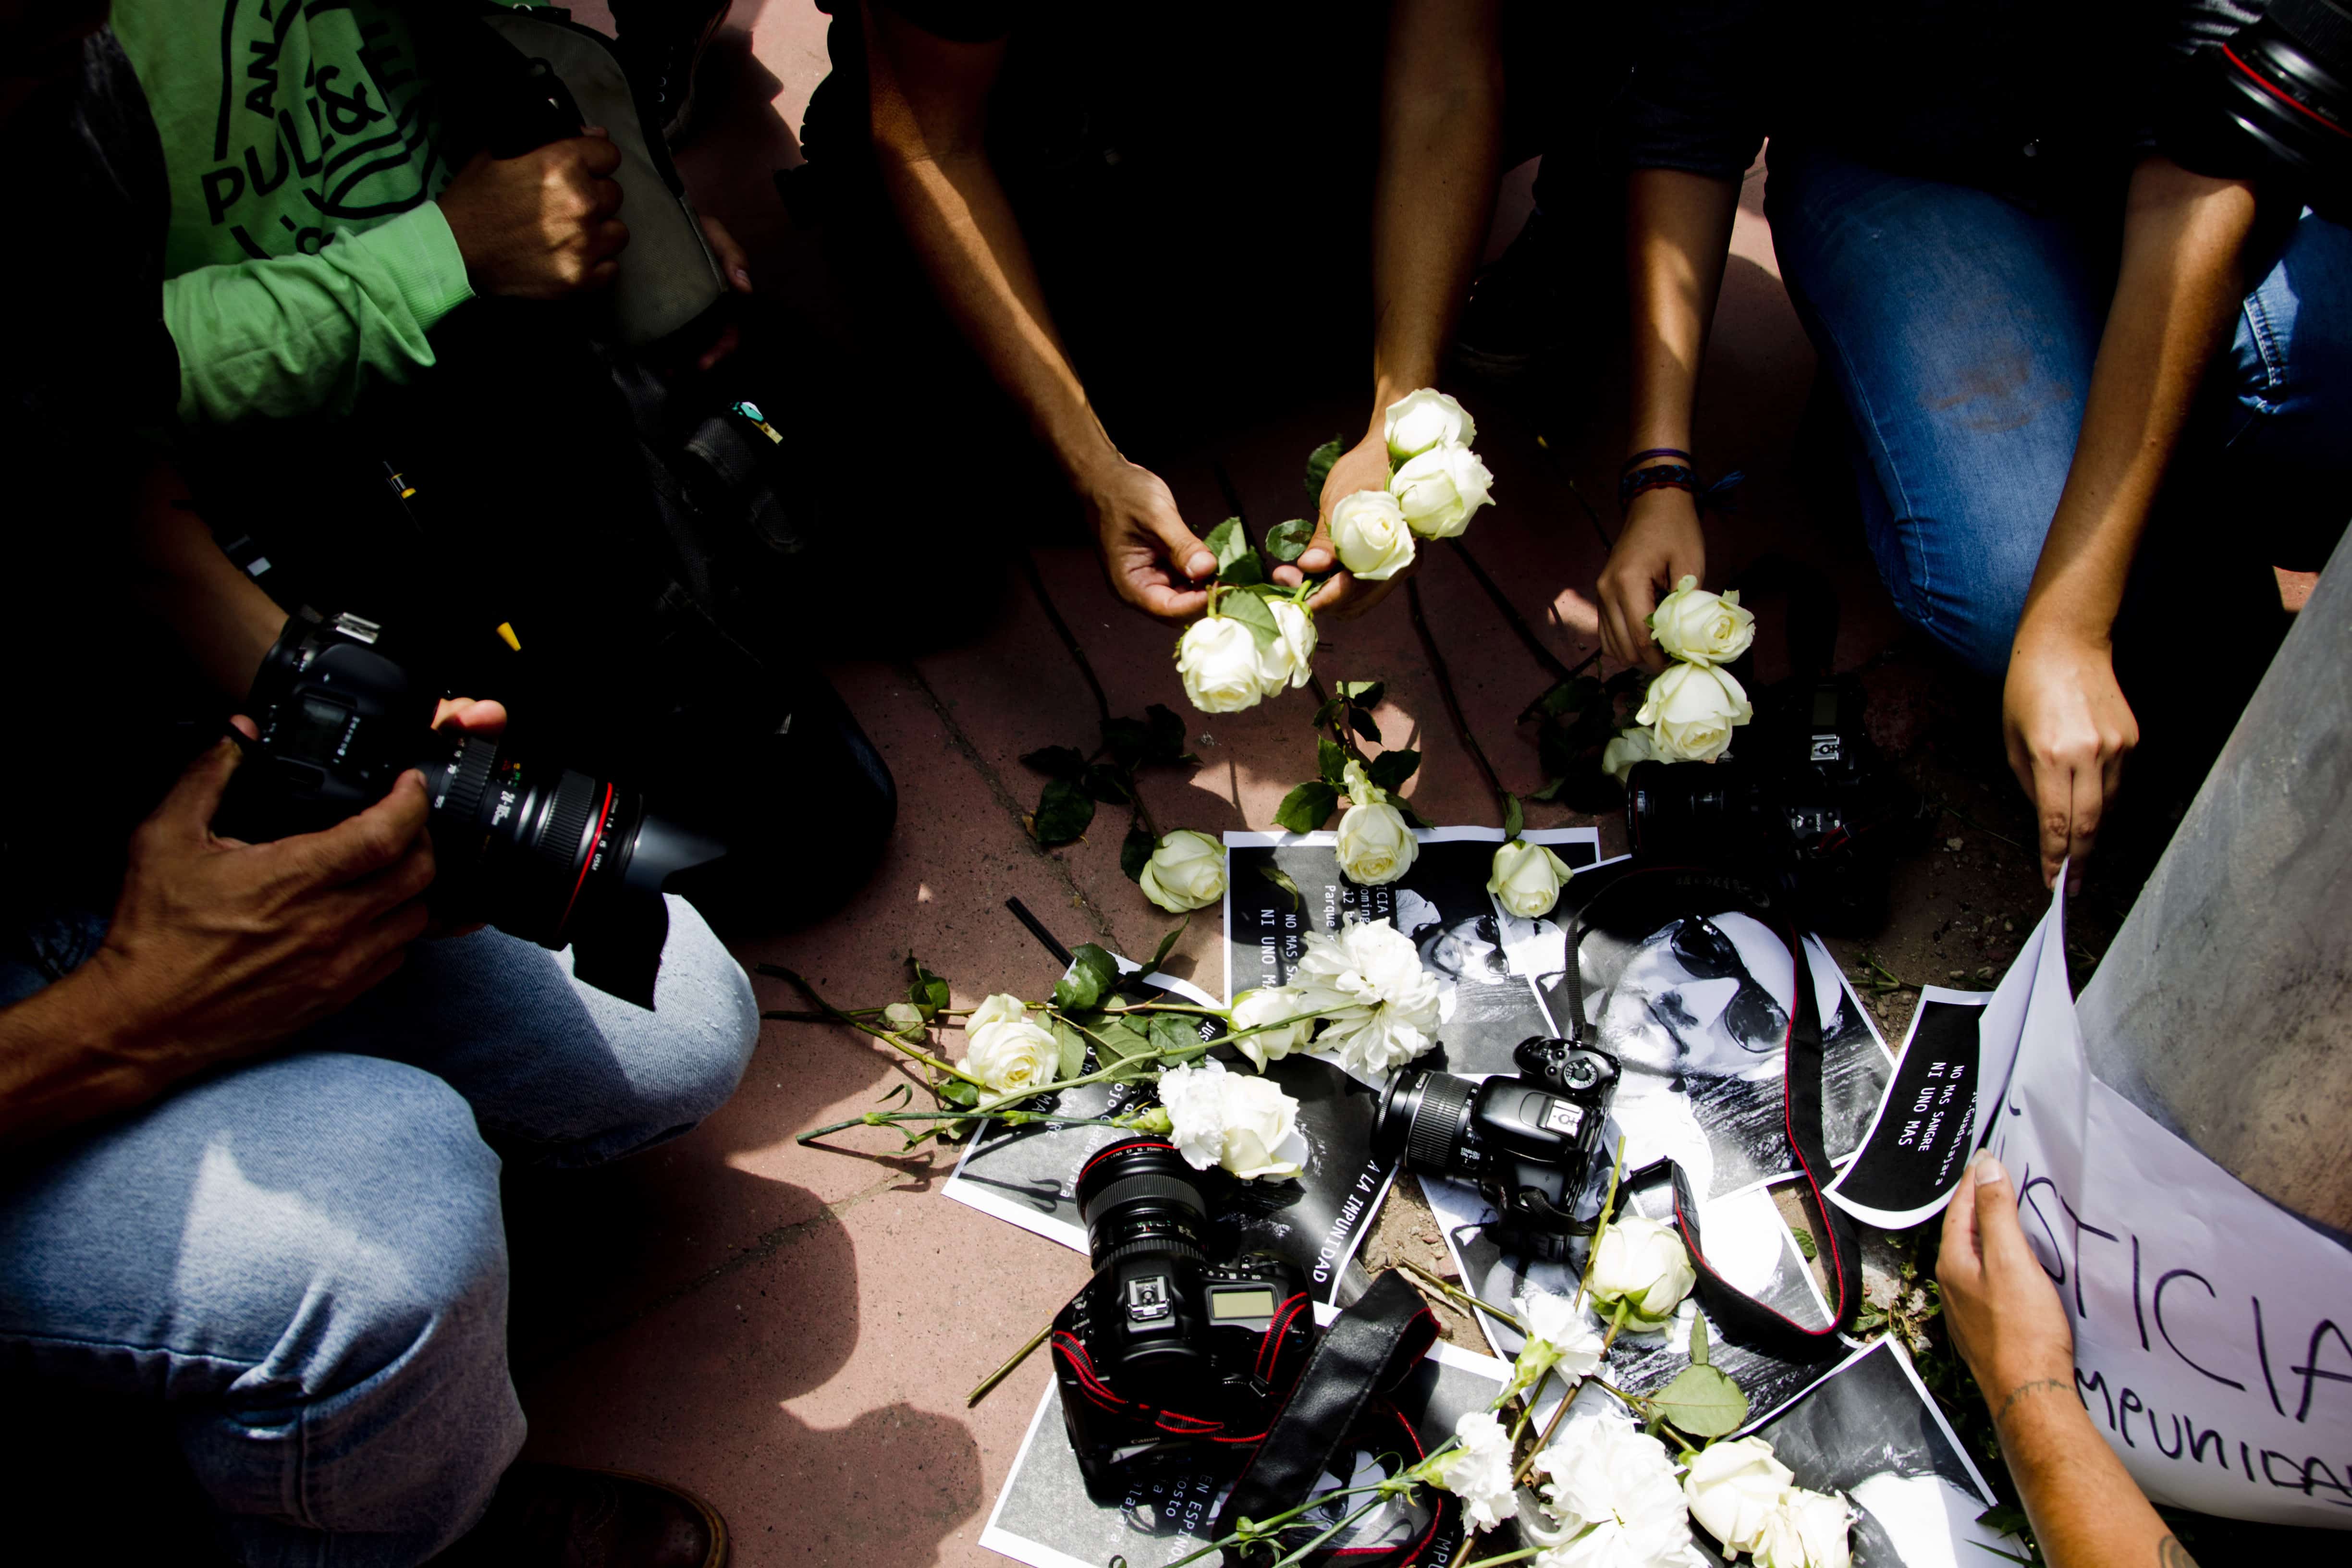 Mexican photojournalists place their cameras on the floor with white flowers .